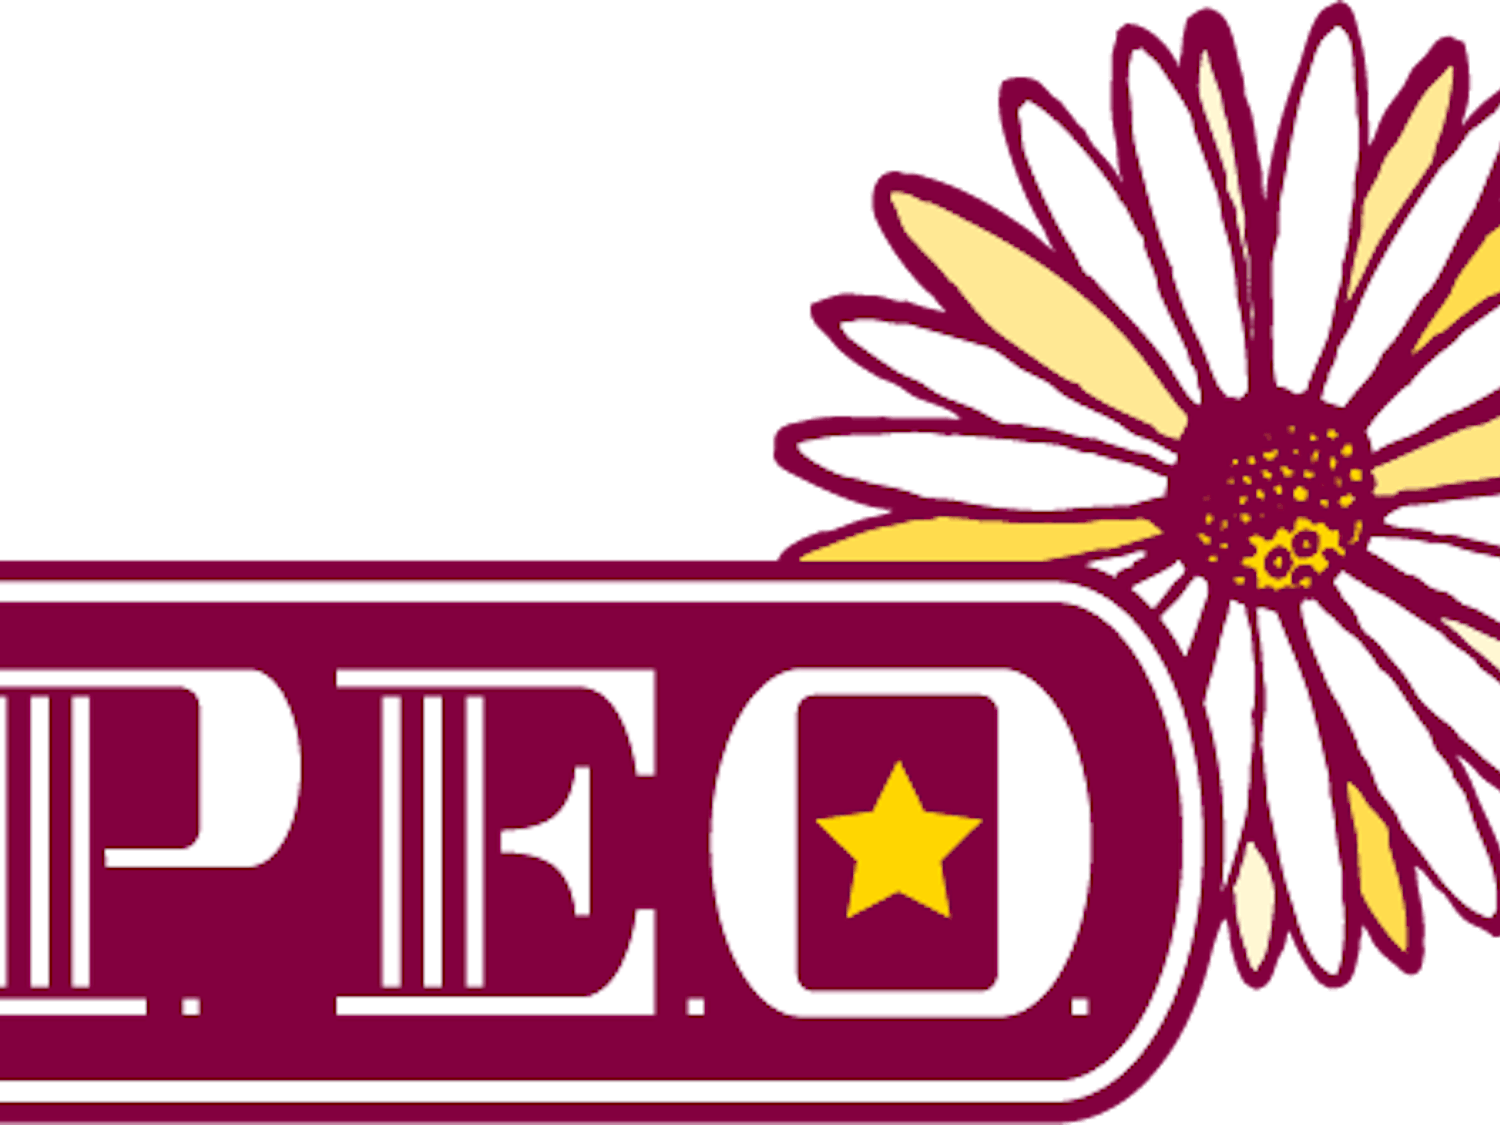 peo_primary_logo.png